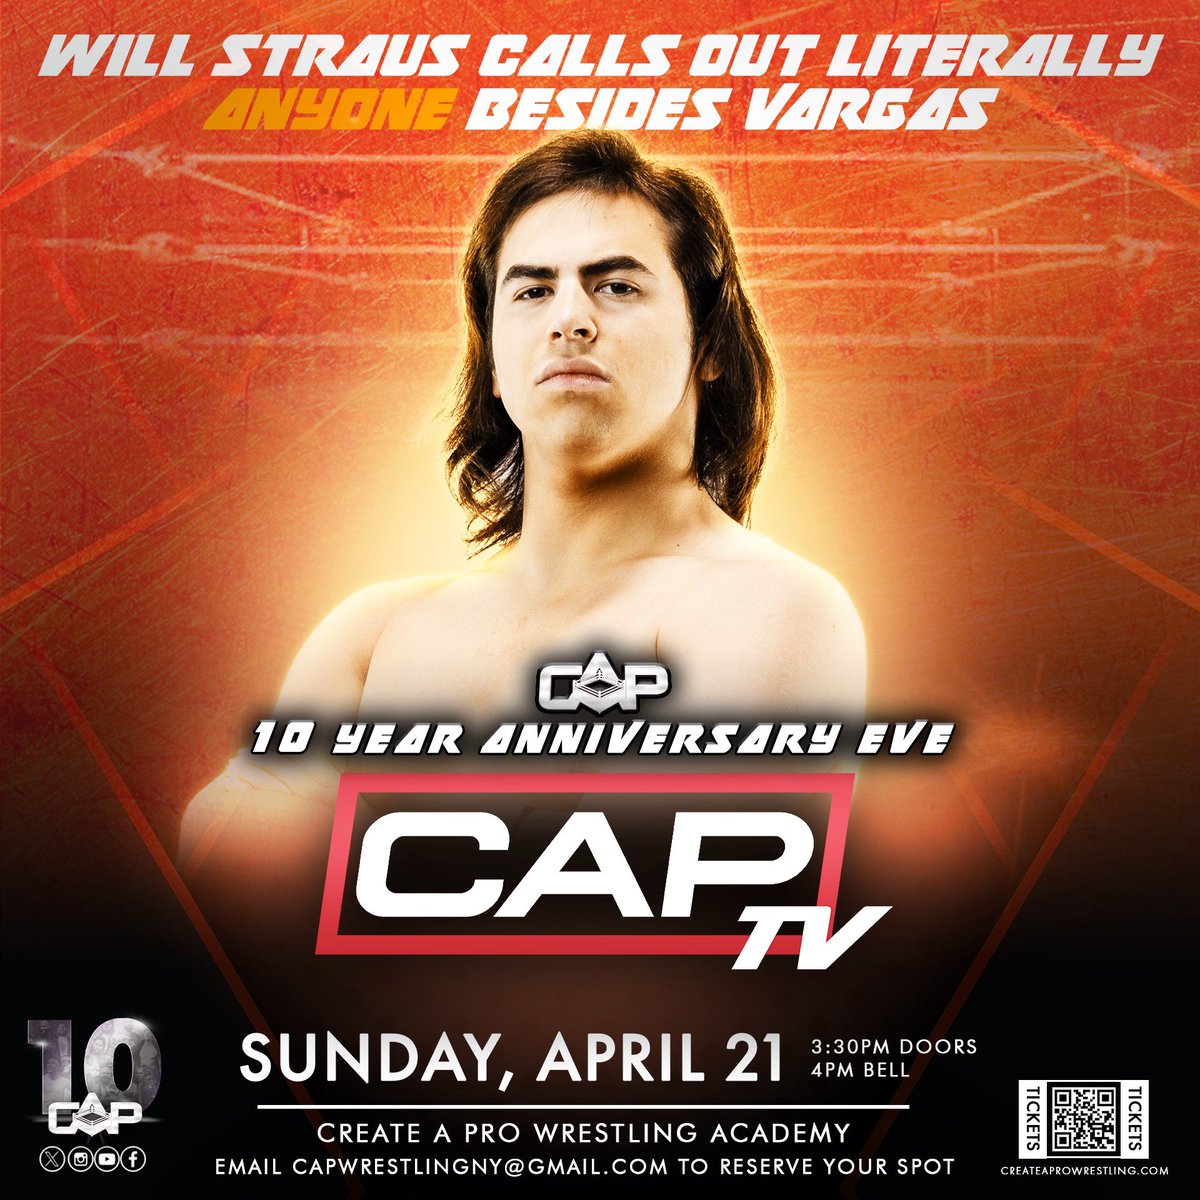 🚨THIS SUNDAY🚨

After 3 unsuccessful matches against Vargas, Will Straus has informed us that he is “moving on with his life”

Instead, Will Straus will be calling out literally anyone besides Vargas!

Who will answer his challenge at #CAPTVLive?

🎟EMAIL TO RESERVE YOUR SPOT🎟